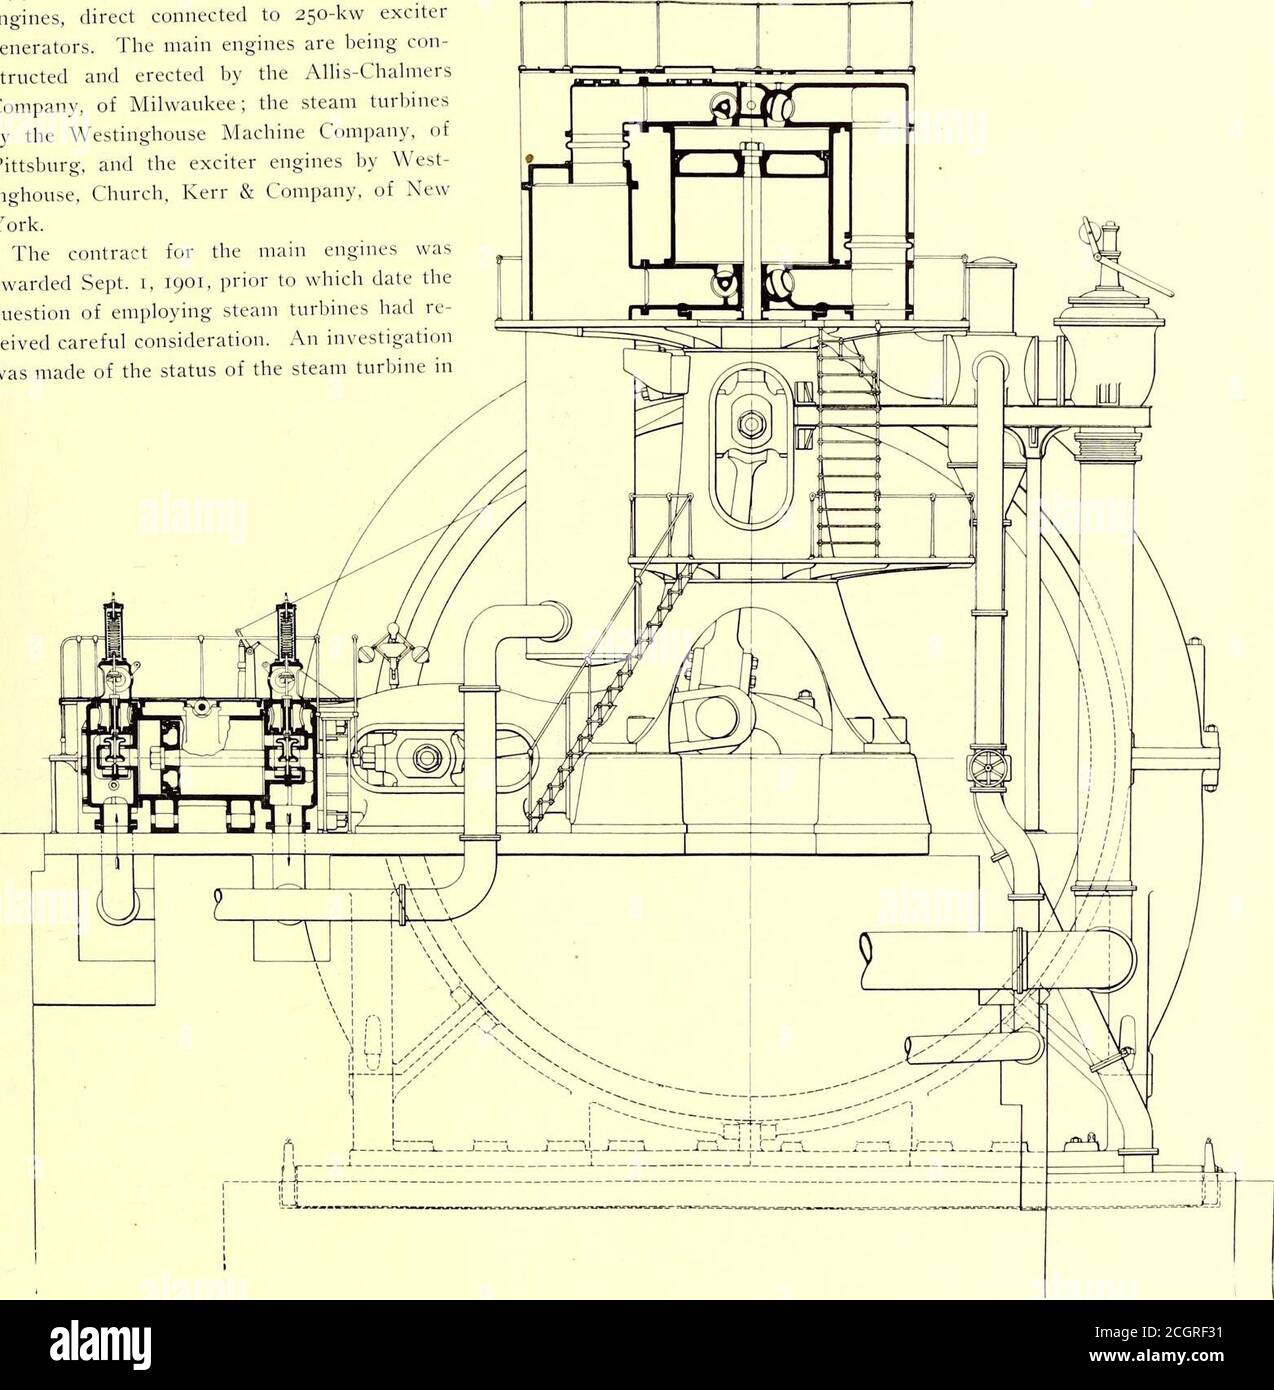 The Street railway journal . 75-kw lighting generators, and two  400-hpengines, direct connected to 250-kw excitergenerators. The main  engines are being con-structed and erected by the Allis-ChalmersCompany, of  Milwaukee; the steam